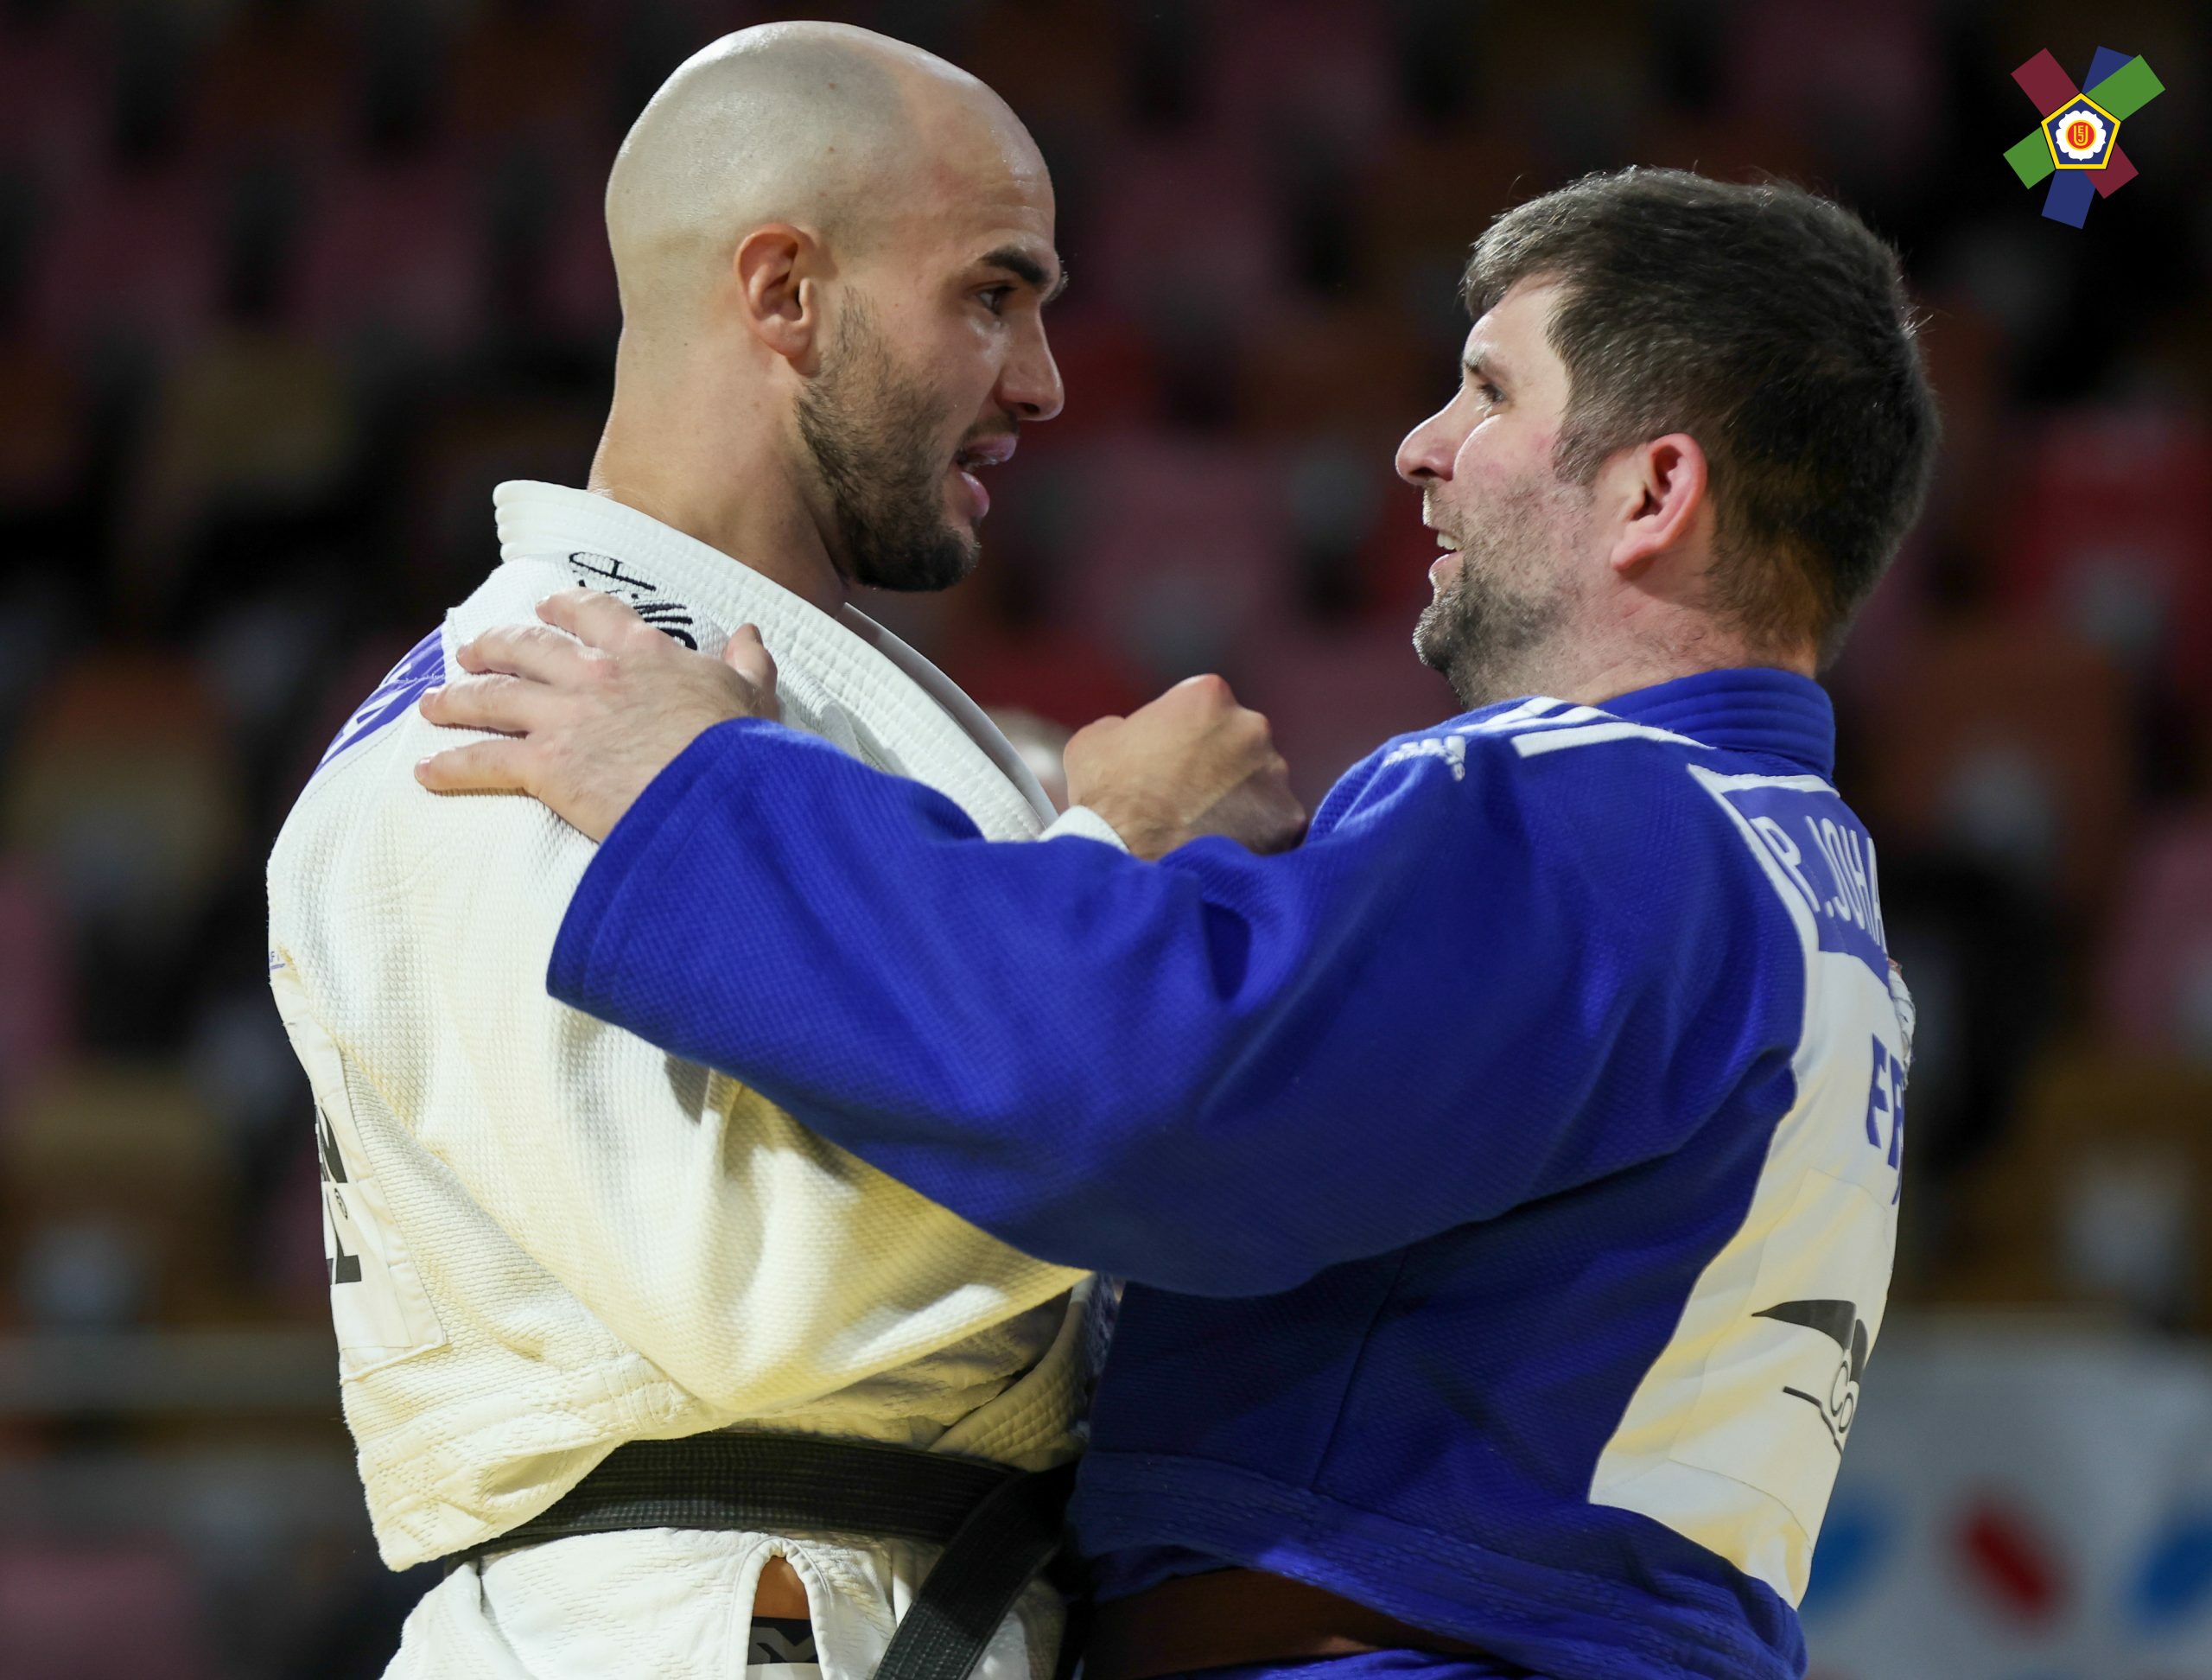 “A LITTLE JUDO IN EVERYONE WOULD MAKE THE WORLD A BETTER PLACE”